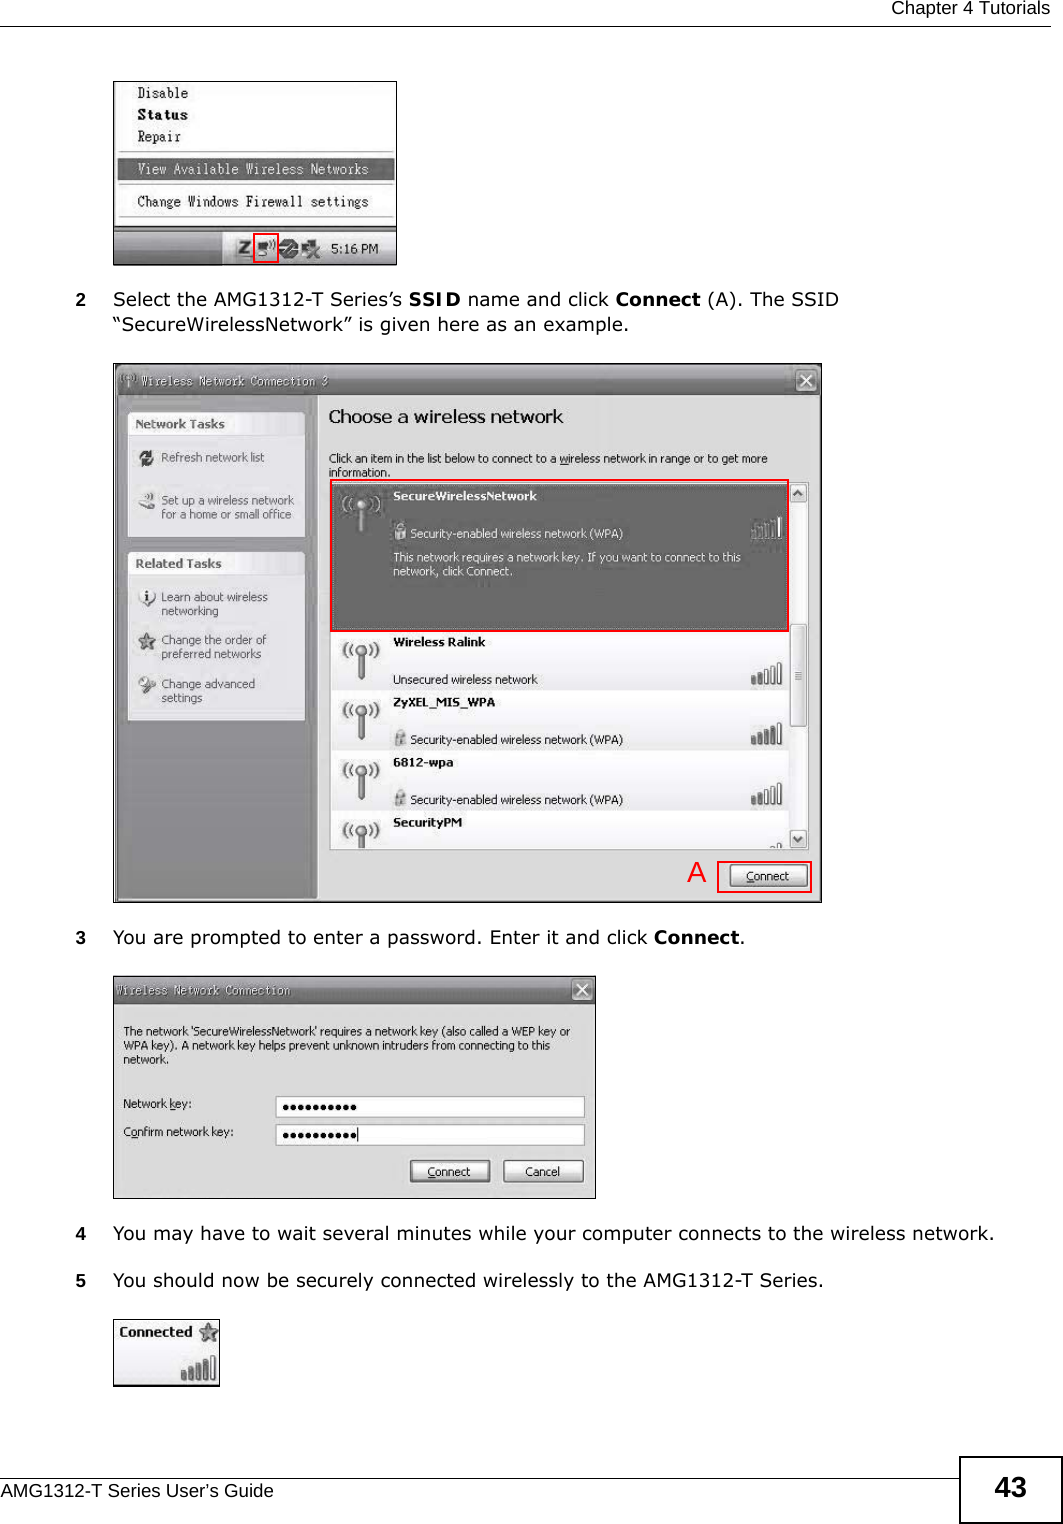  Chapter 4 TutorialsAMG1312-T Series User’s Guide 43Tutorial: Status2Select the AMG1312-T Series’s SSID name and click Connect (A). The SSID “SecureWirelessNetwork” is given here as an example. Tutorial: Status3You are prompted to enter a password. Enter it and click Connect. Tutorial: Status4You may have to wait several minutes while your computer connects to the wireless network.5You should now be securely connected wirelessly to the AMG1312-T Series. Tutorial: StatusA